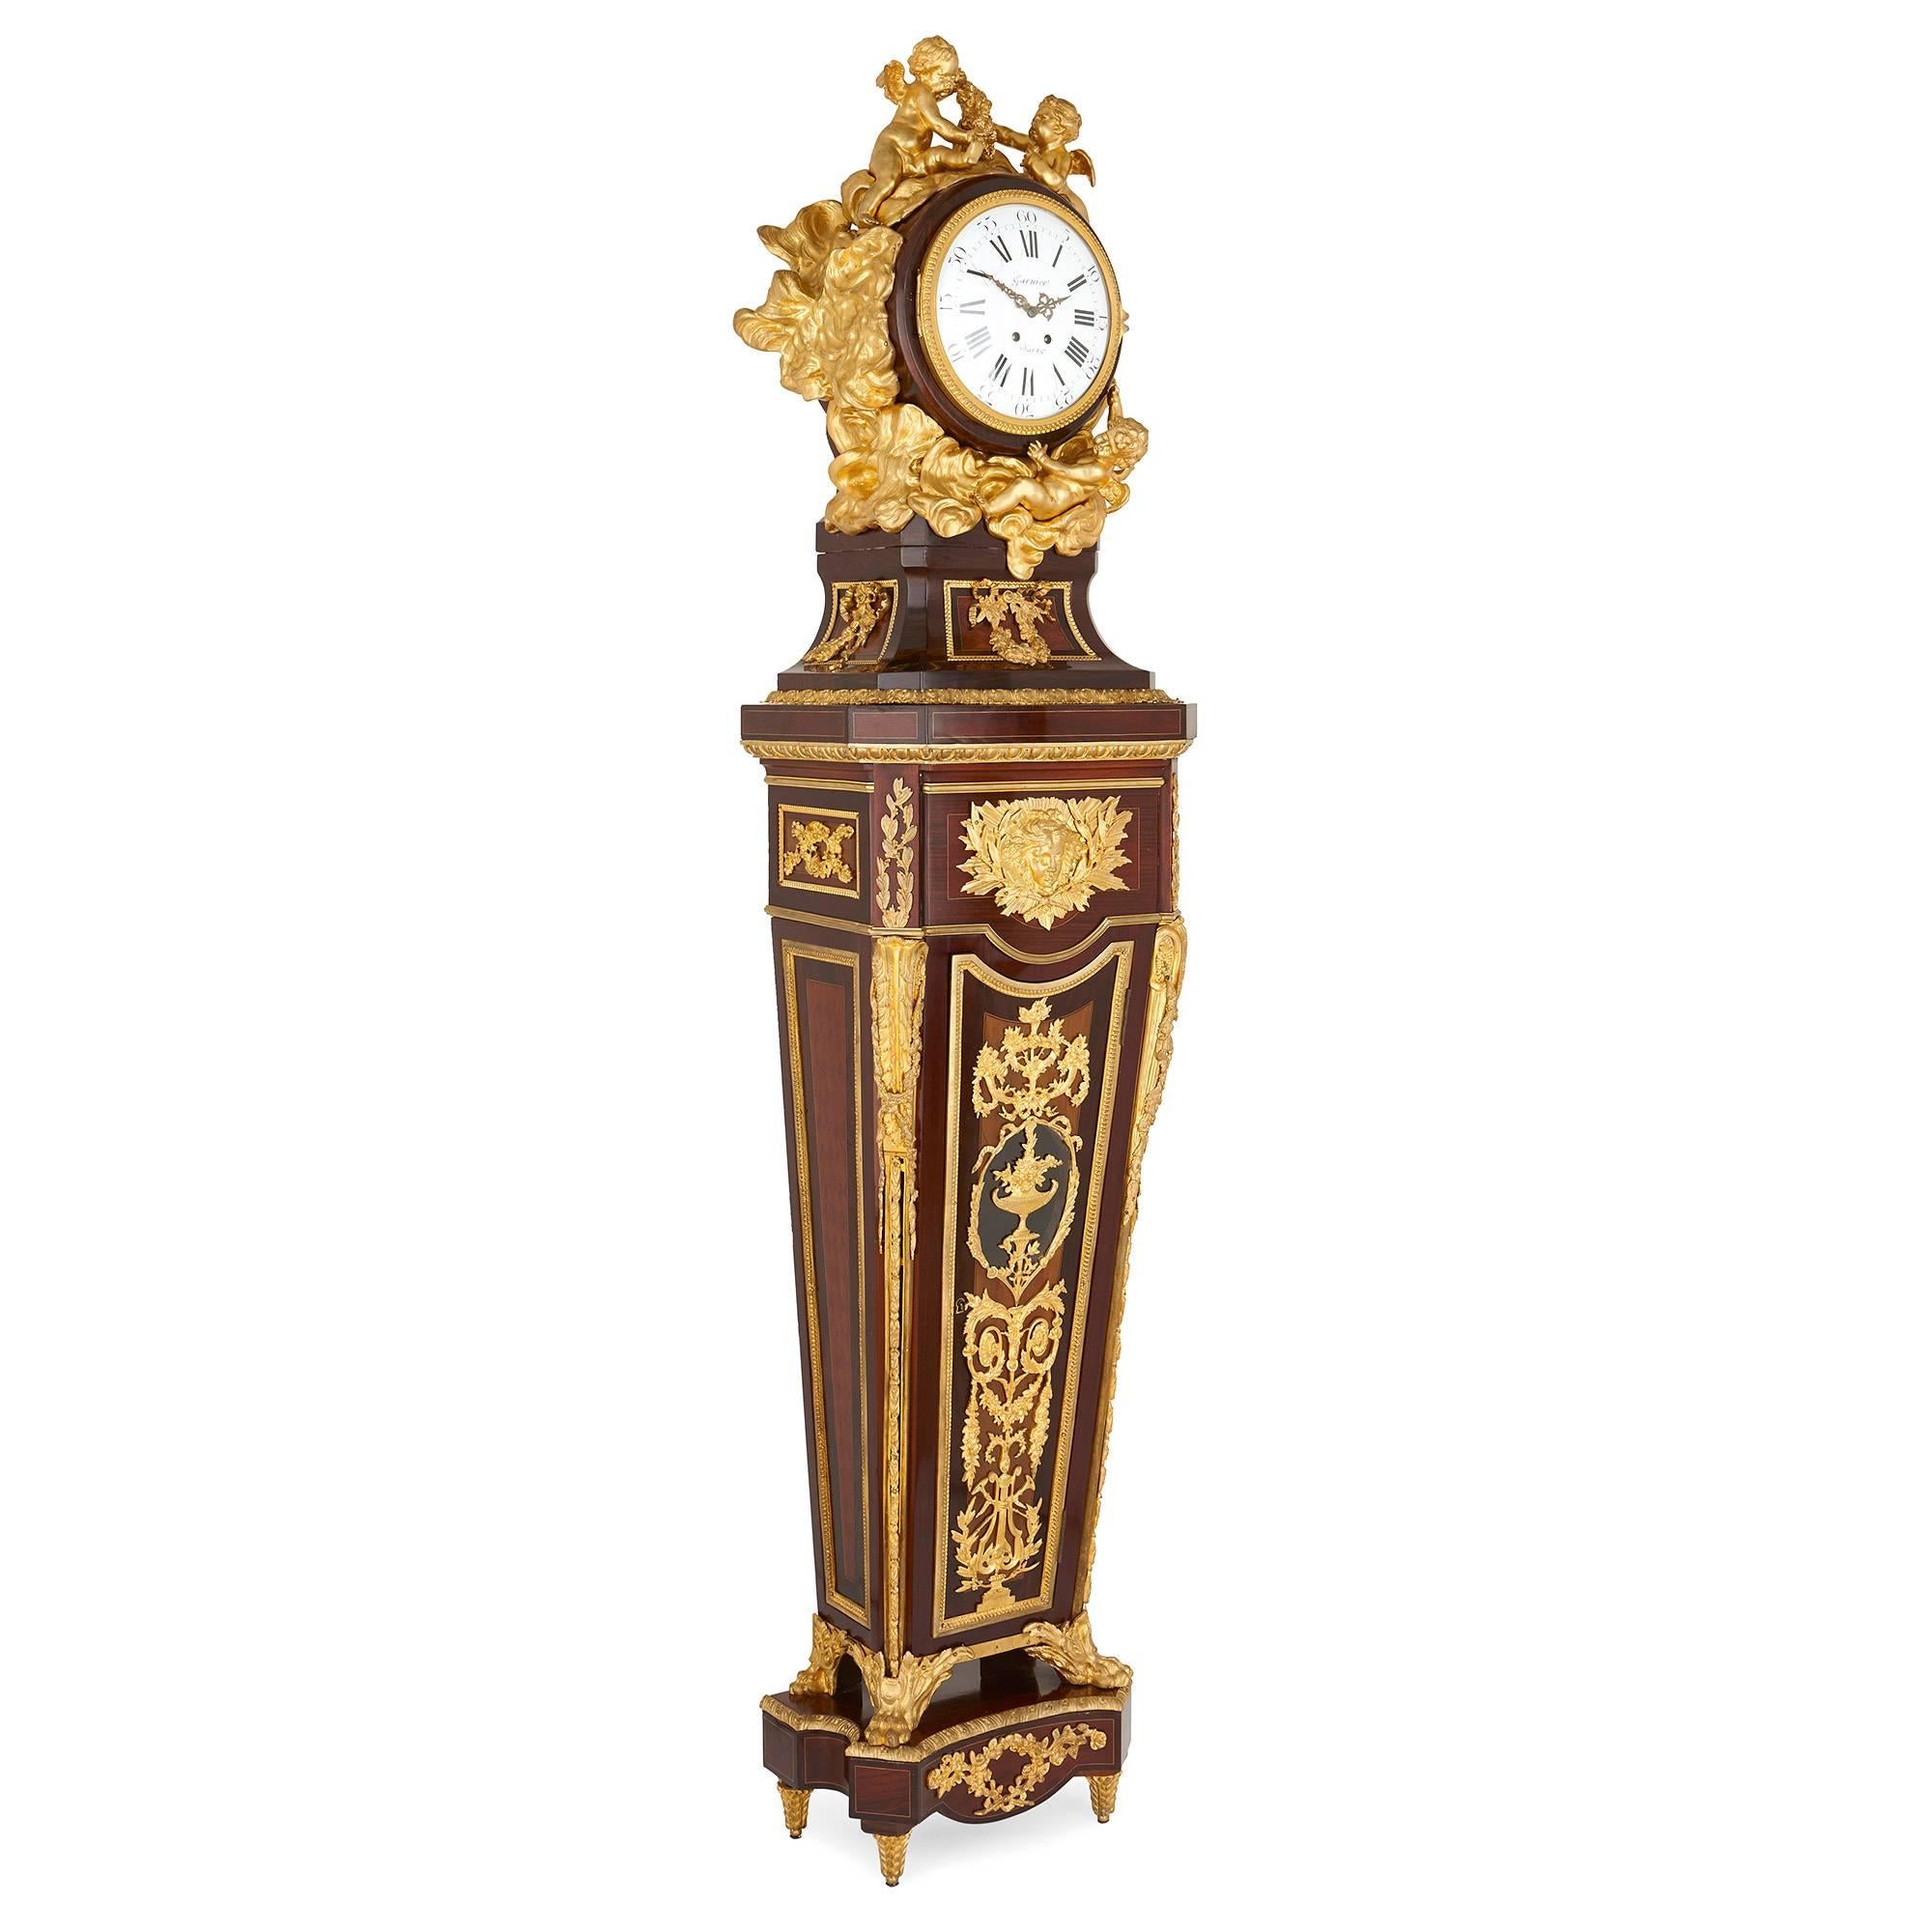 This exquisite gilt bronze-mounted pedestal clock is the creation of the famed French clockmaker Paul Garnier (1801-1861). Garnier worked in Paris during the first half of the 19th Century, and won gold medals at the Paris exhibitions of 1844 and